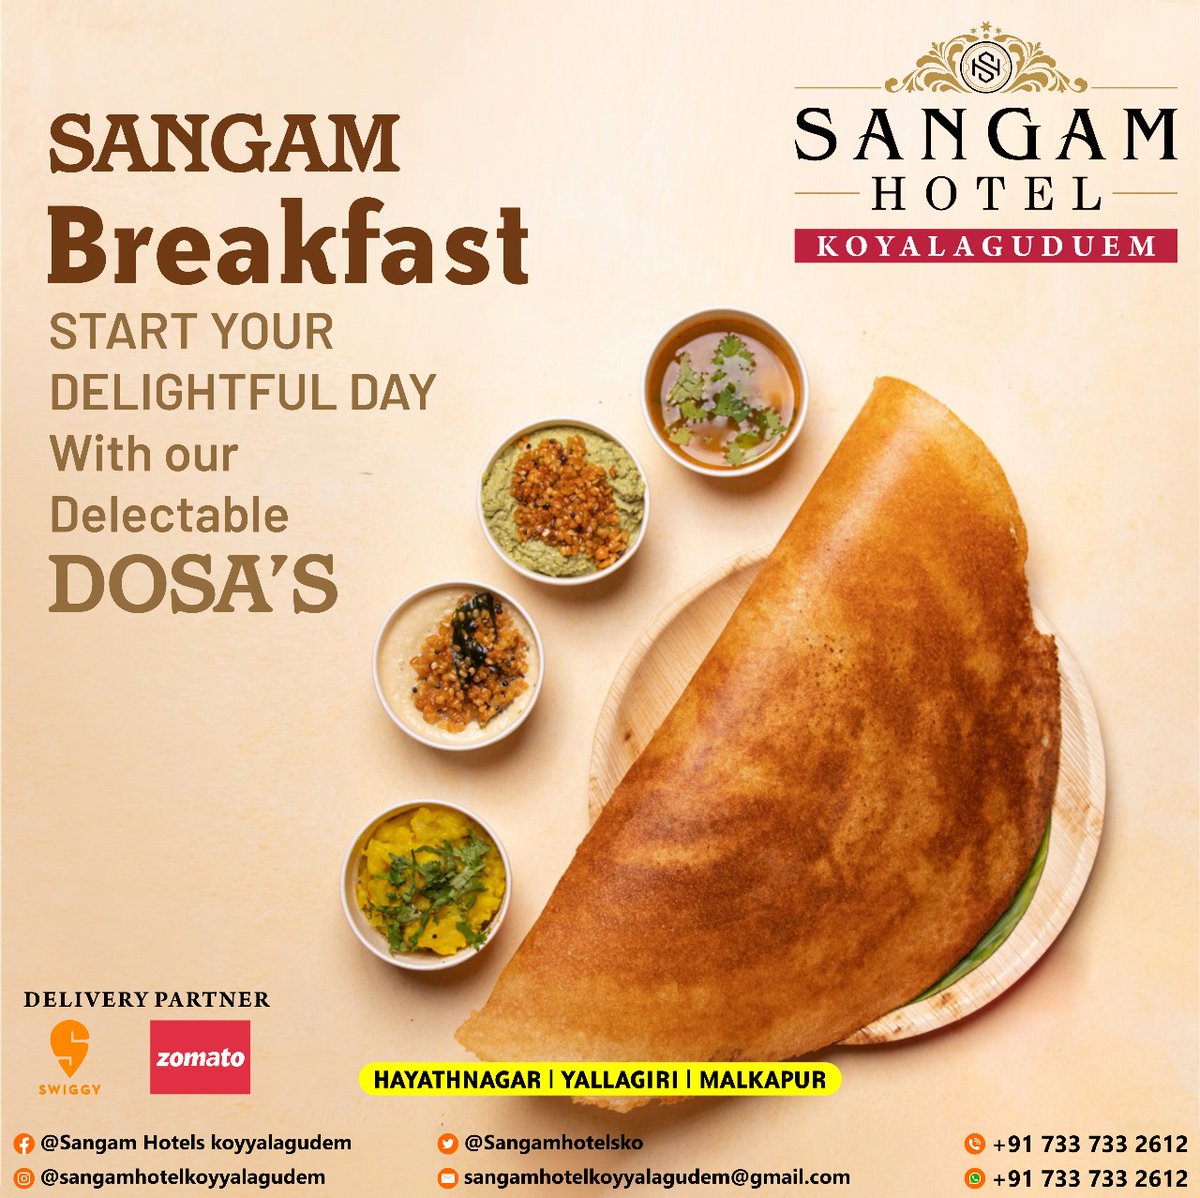 Start your delightful day with our delectable Dosa's! @Sangamhotelsma

#dosa #southindianfood #foodie #food #indianfood #foodphotography #foodporn #foodblogger #idli #breakfast #foodstagram #southindian #instafood #foodlover #chutney #yummy #masaladosa #foodgasm #homemade